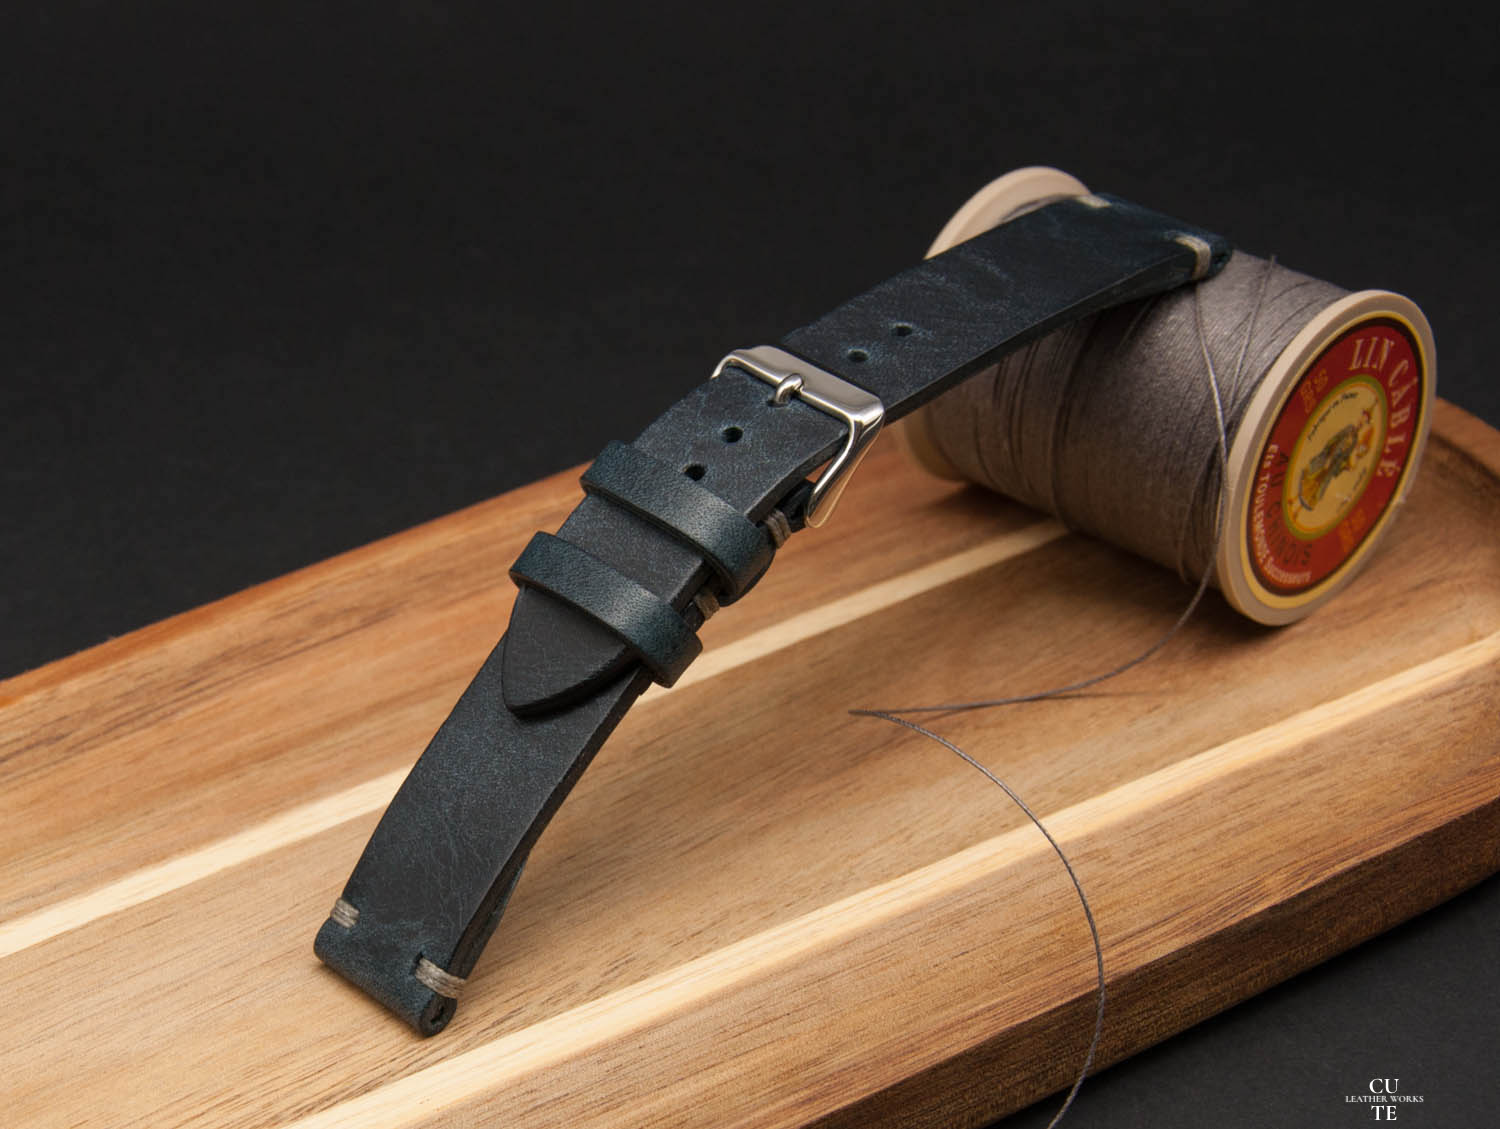 Badalassi Wax Navy leather watch strap, Hand-made, With Lining